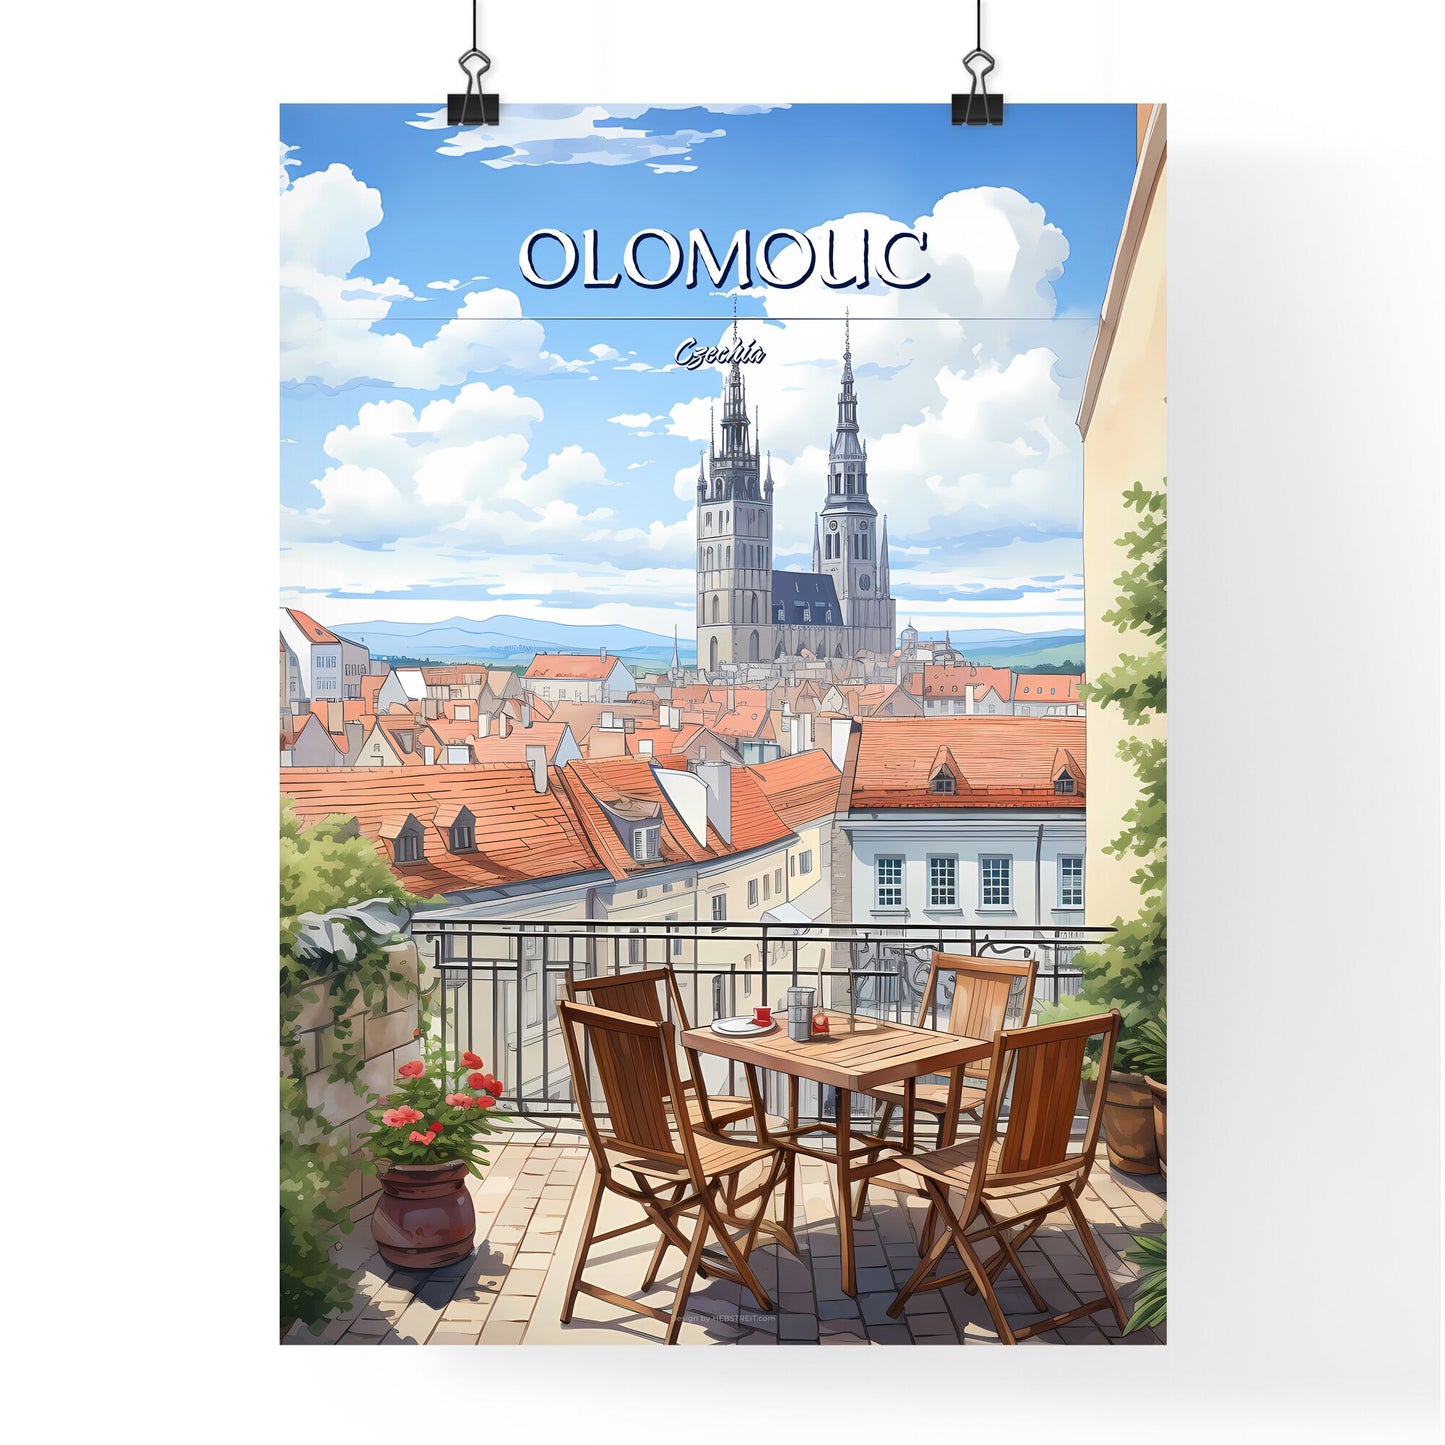 Olomouc, Czechia - Art print of a table and chairs on a balcony overlooking a city Default Title